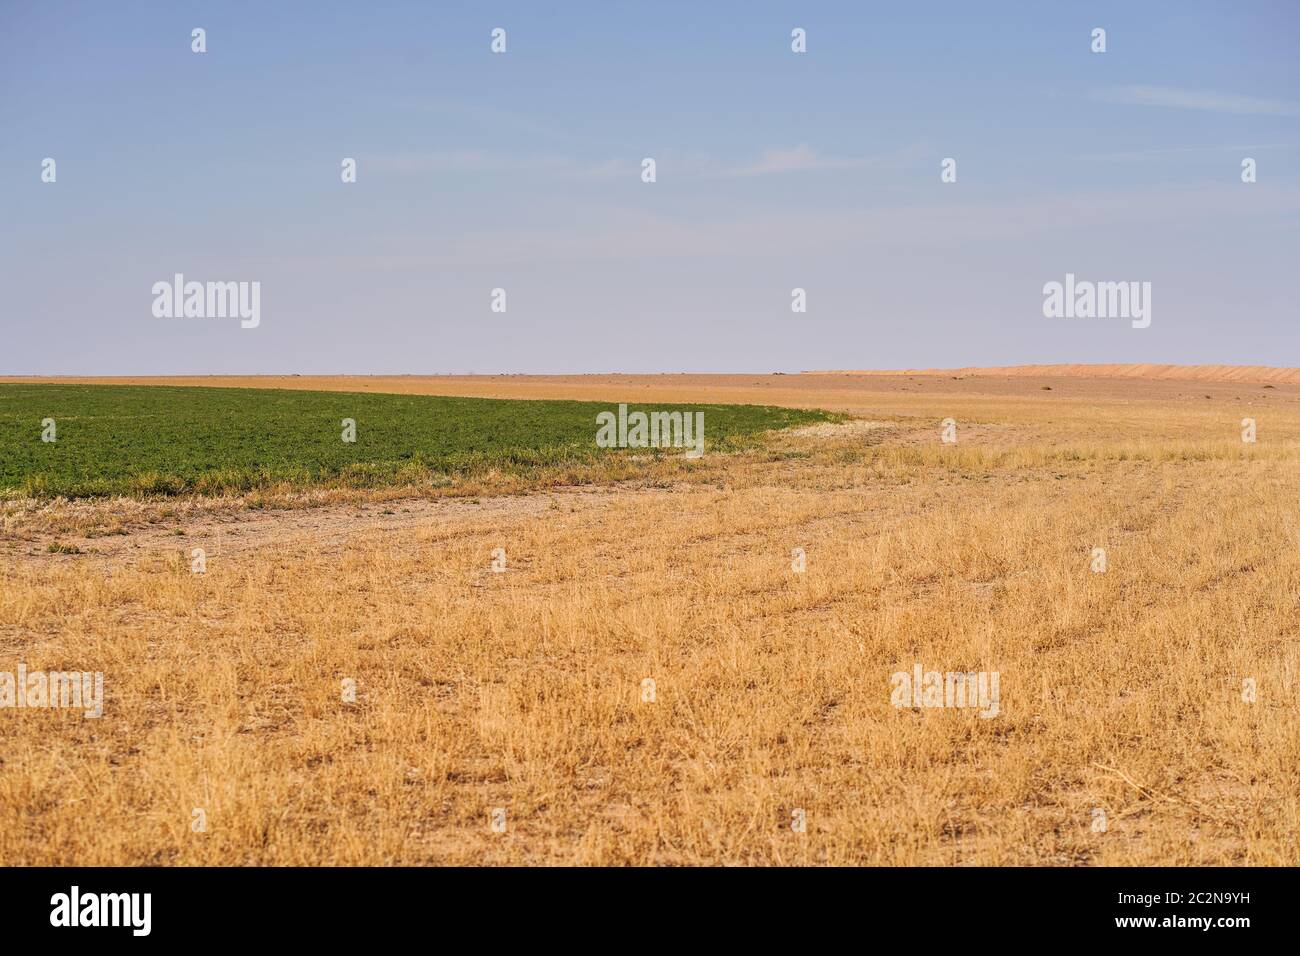 Landscape shot of agriculture fields irrigated with groundwater in desert area in northern Saudi Arabia Stock Photo